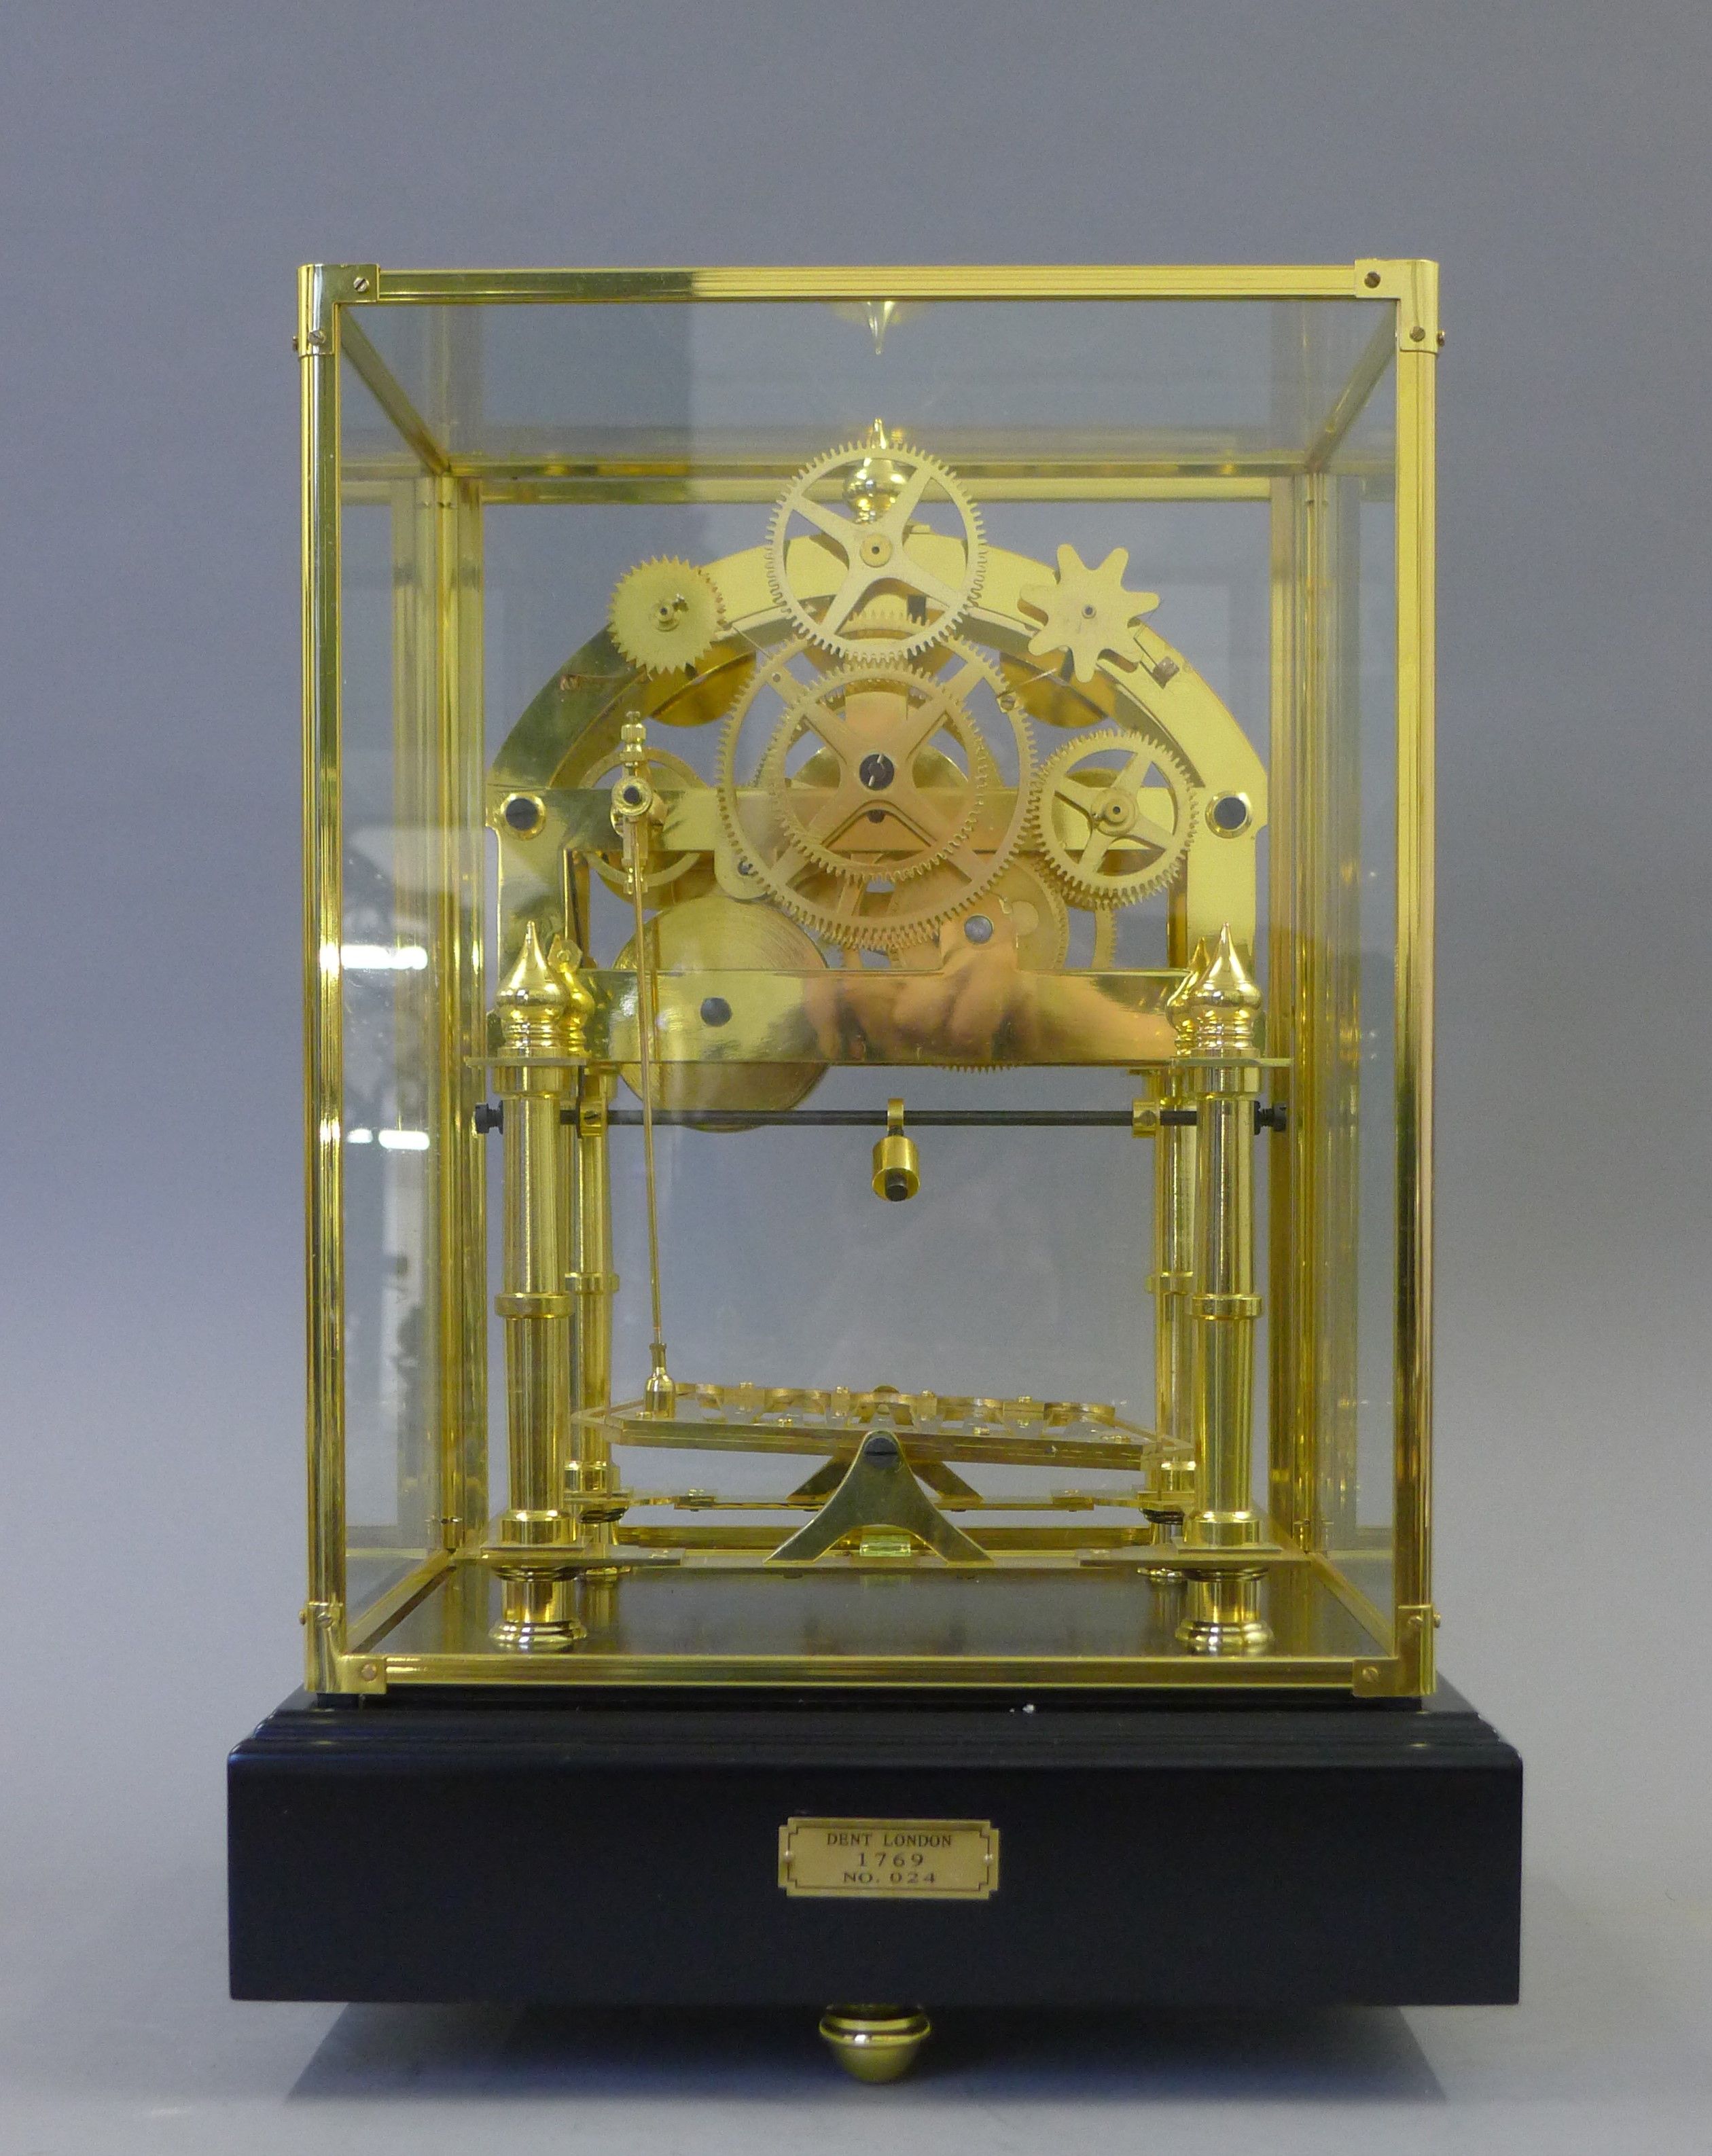 A moon phase congreave clock. 43 cm high. - Image 4 of 5